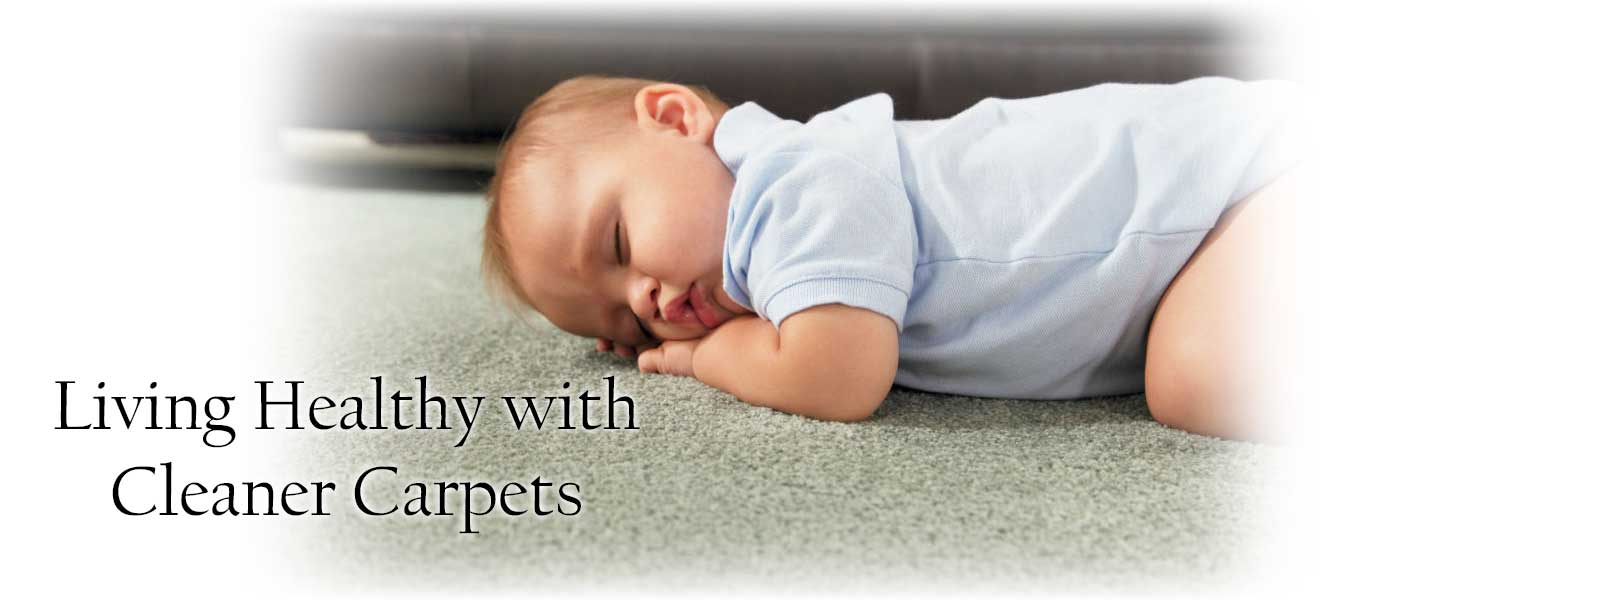 safe-carpet-cleaning-for-pets-and-kids